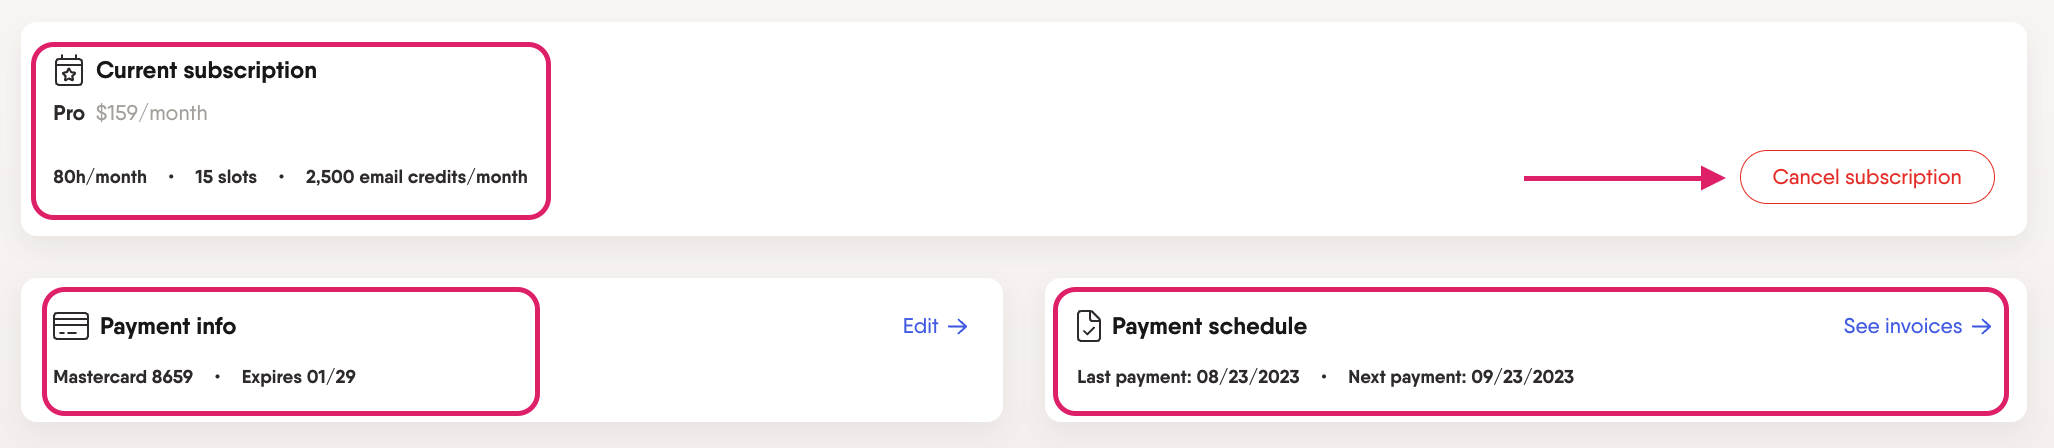 subscription-status-payment-schedule.png